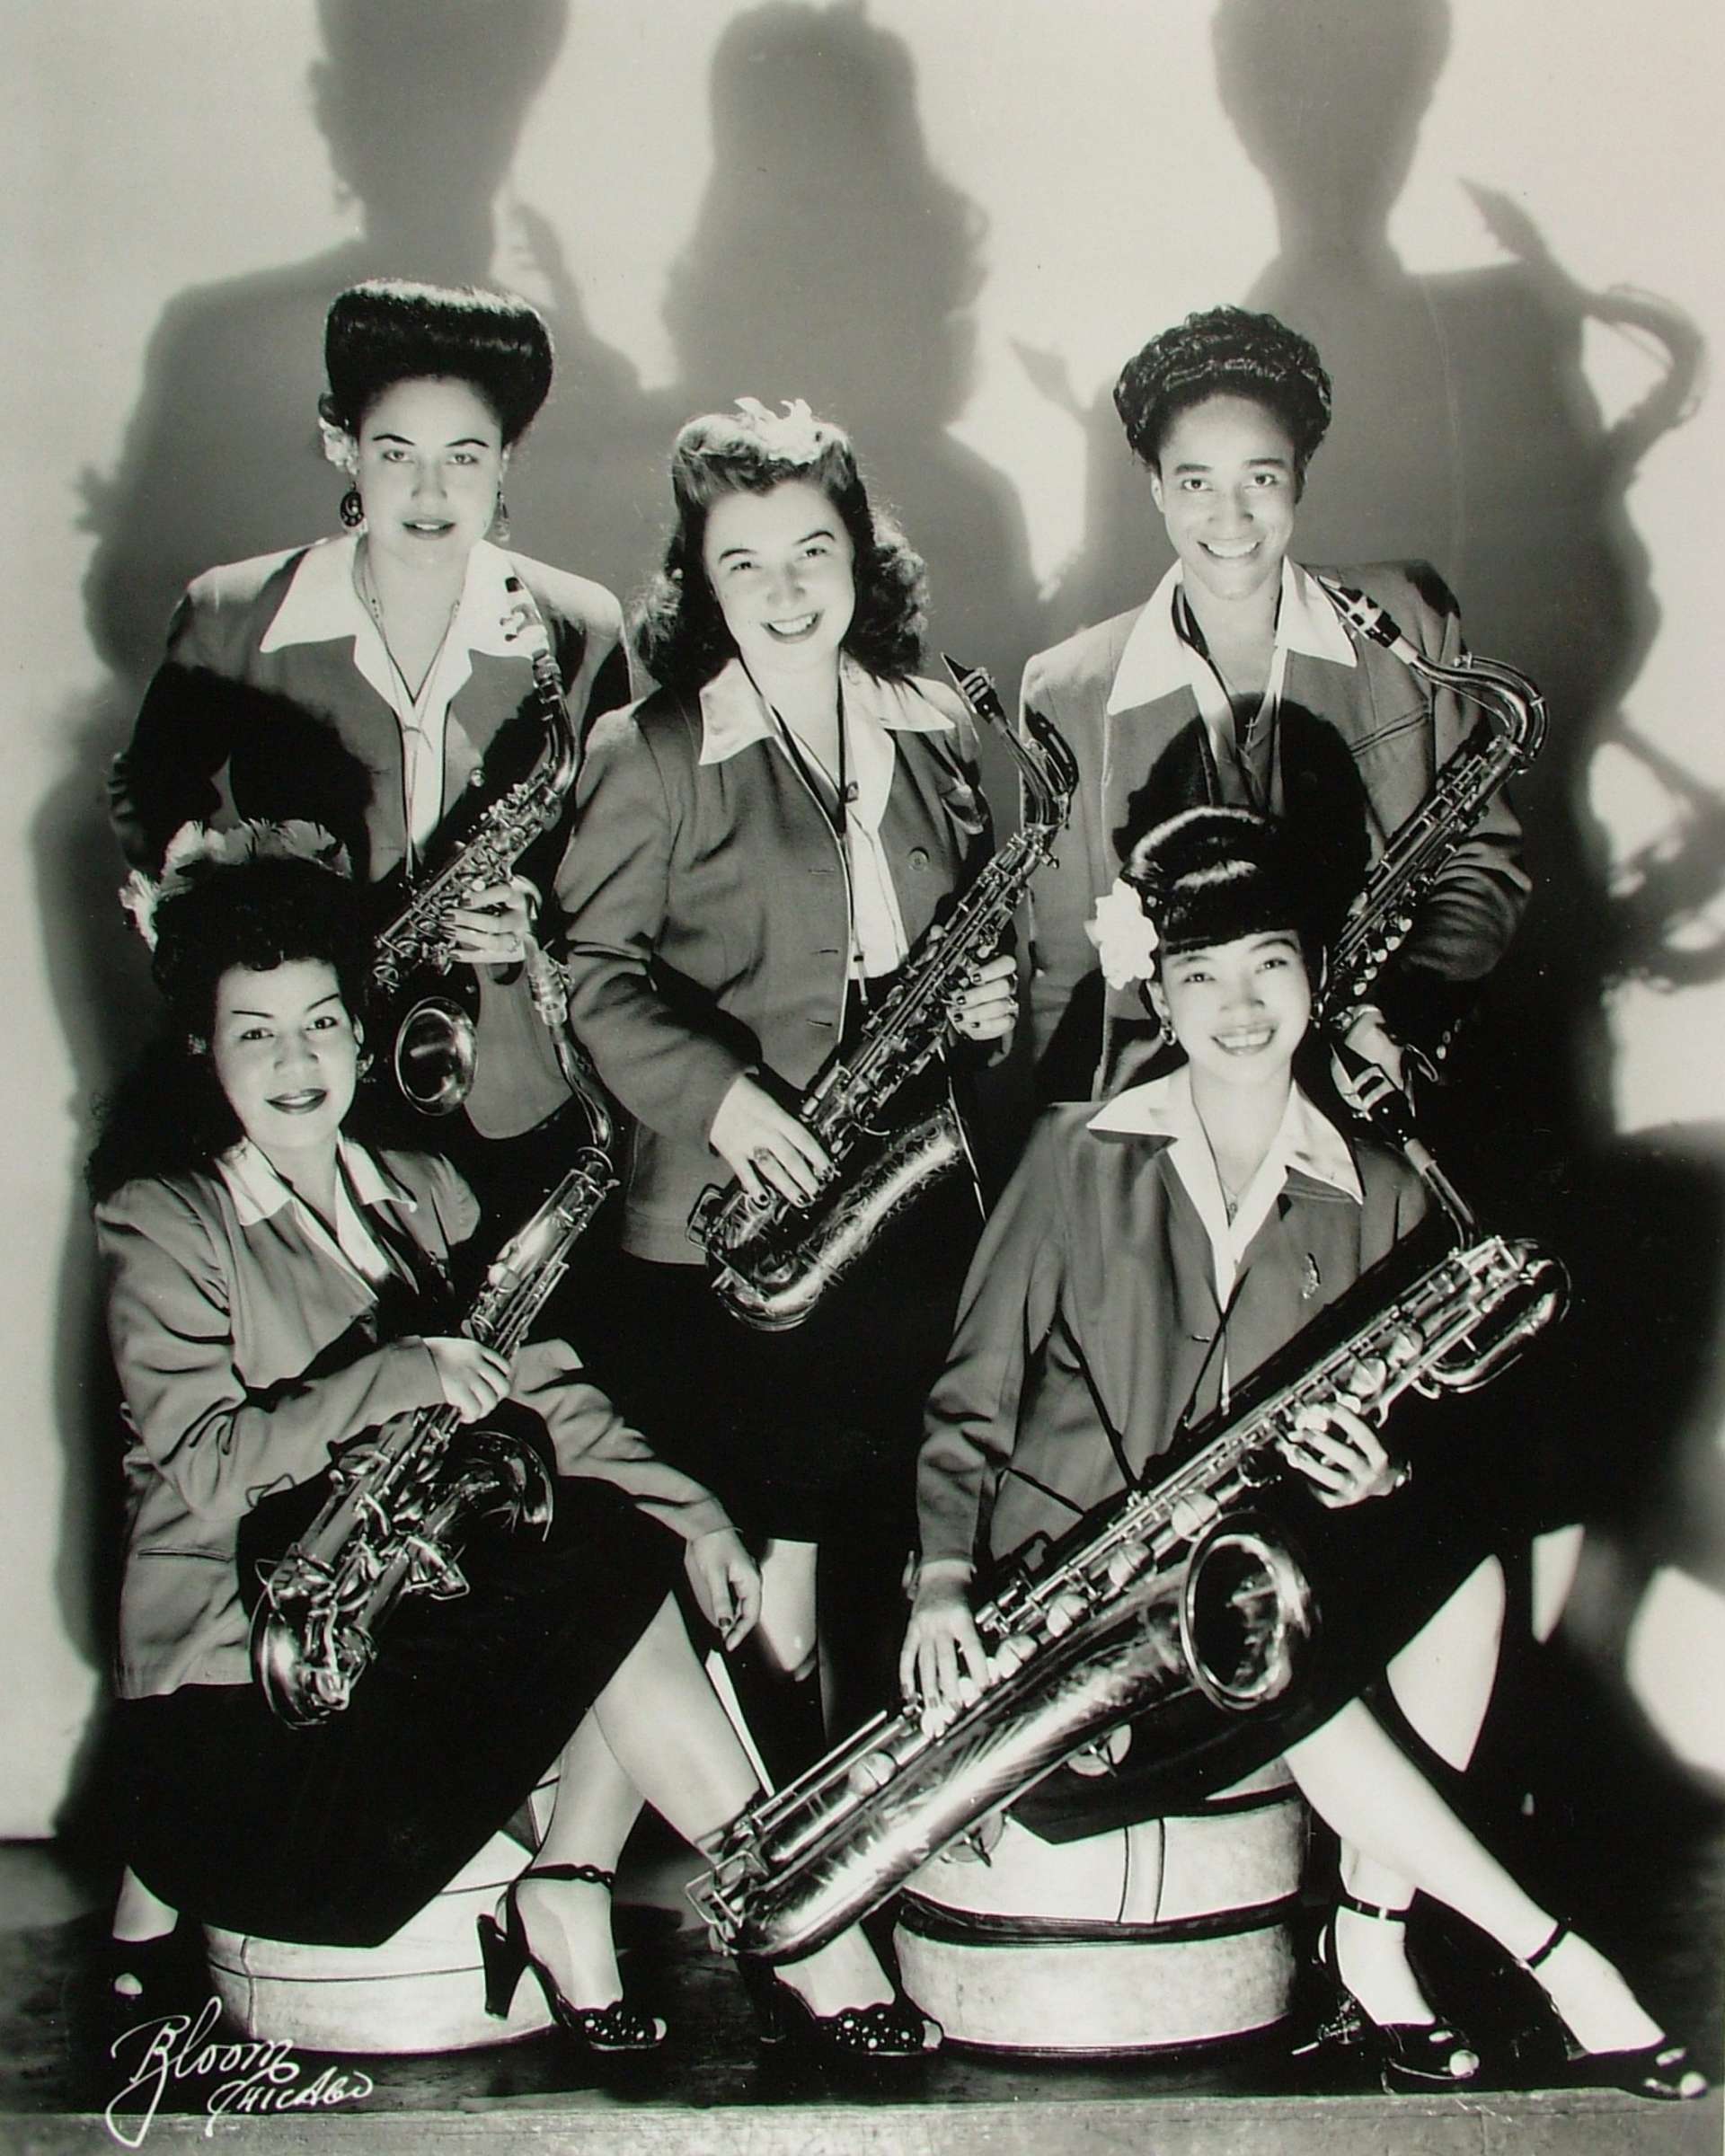 cue-153-194-030-roz-sweethearts-sax-section-roz-cron-updated-7-19-10-scaled.jpg